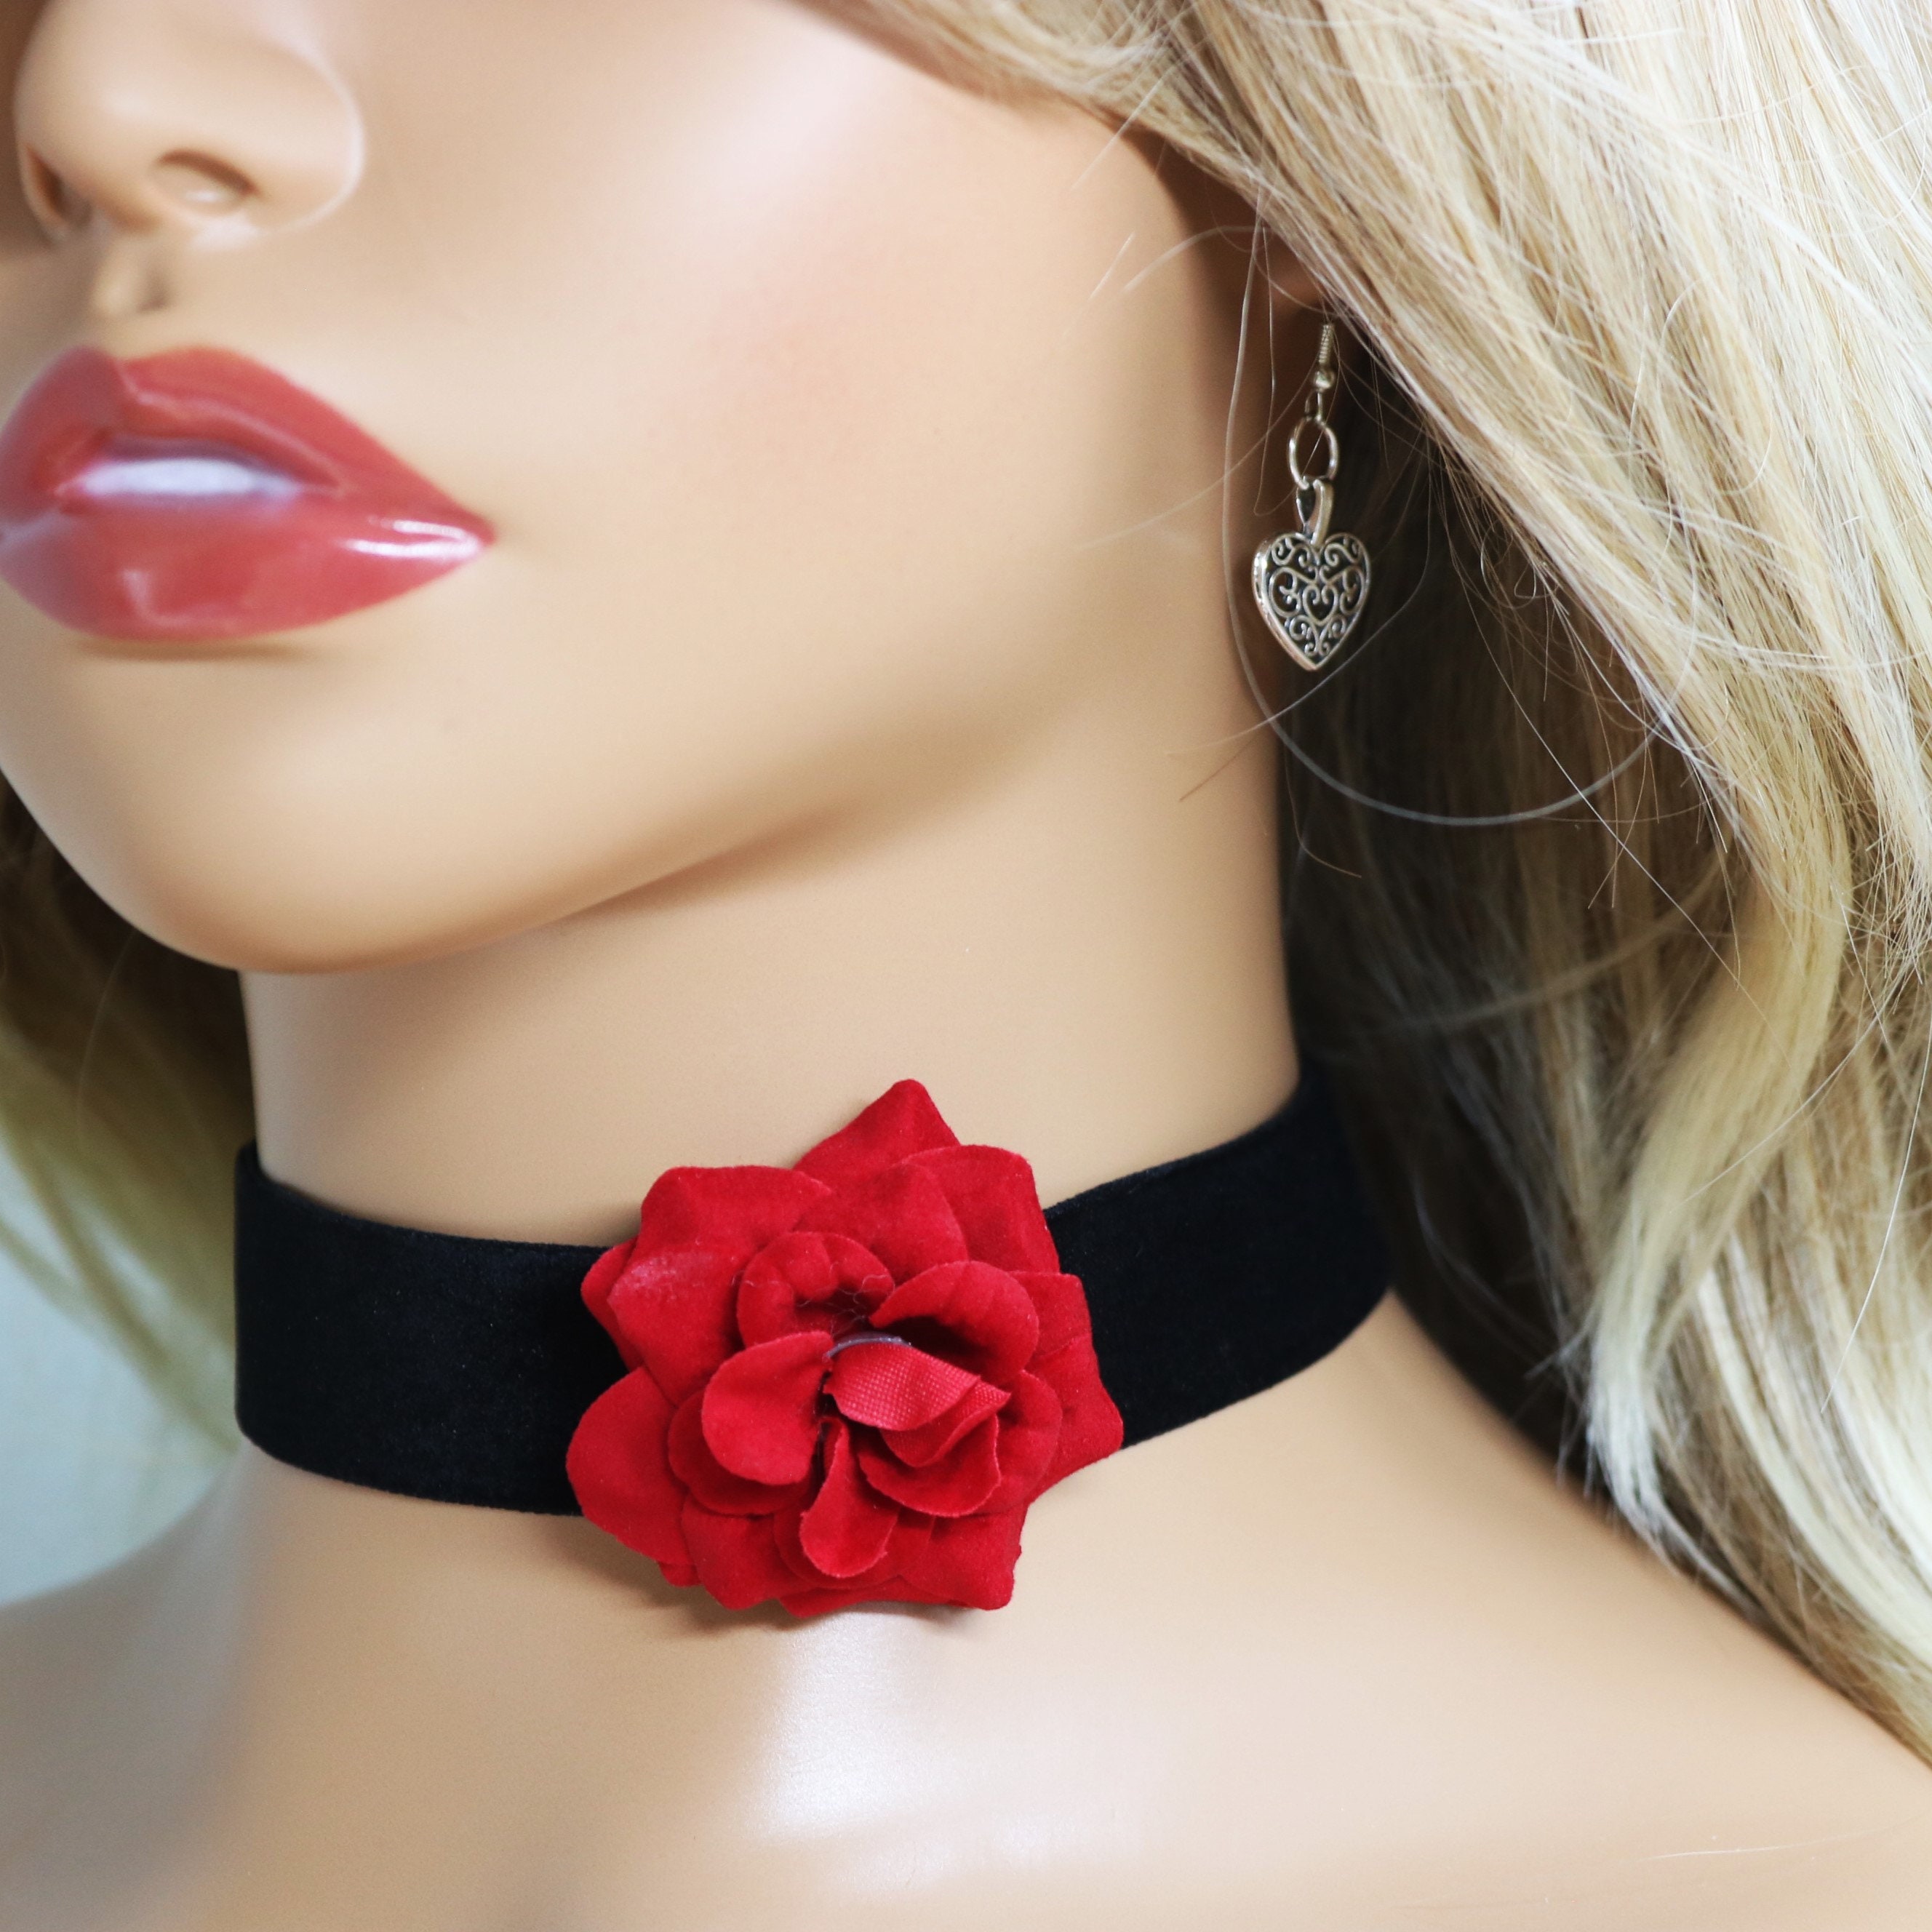 DAYANEY Valentines Day Gifts For Her Heart Necklace, Red Choker Necklace  For Women, Vintage Choker Necklace, Black Velvet Choker Heart Jewelry As